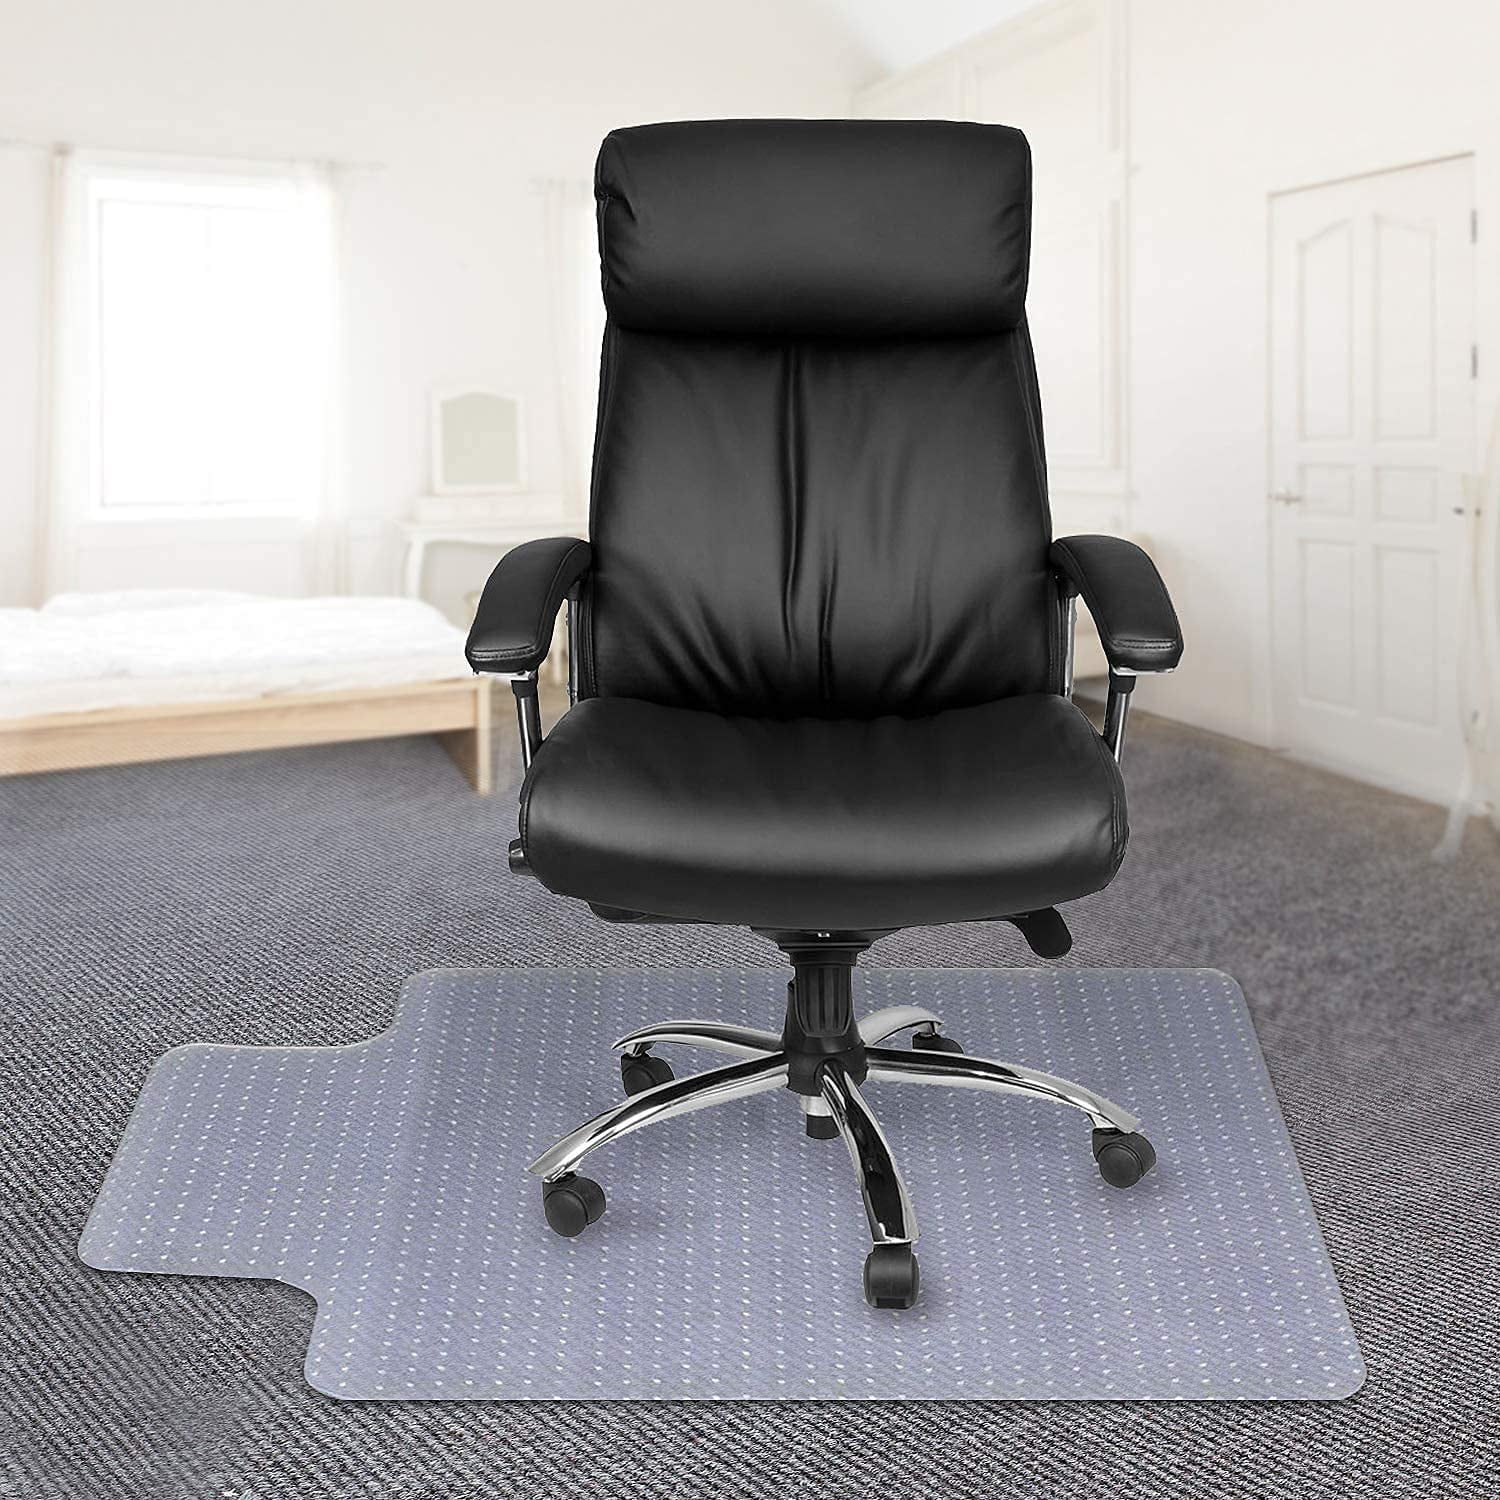 Kuyal Chair mat for Hard Floors 30 x 48 inches Rectangle Floor Mats Wood/Tile Protection Mat for Office & Home Black 